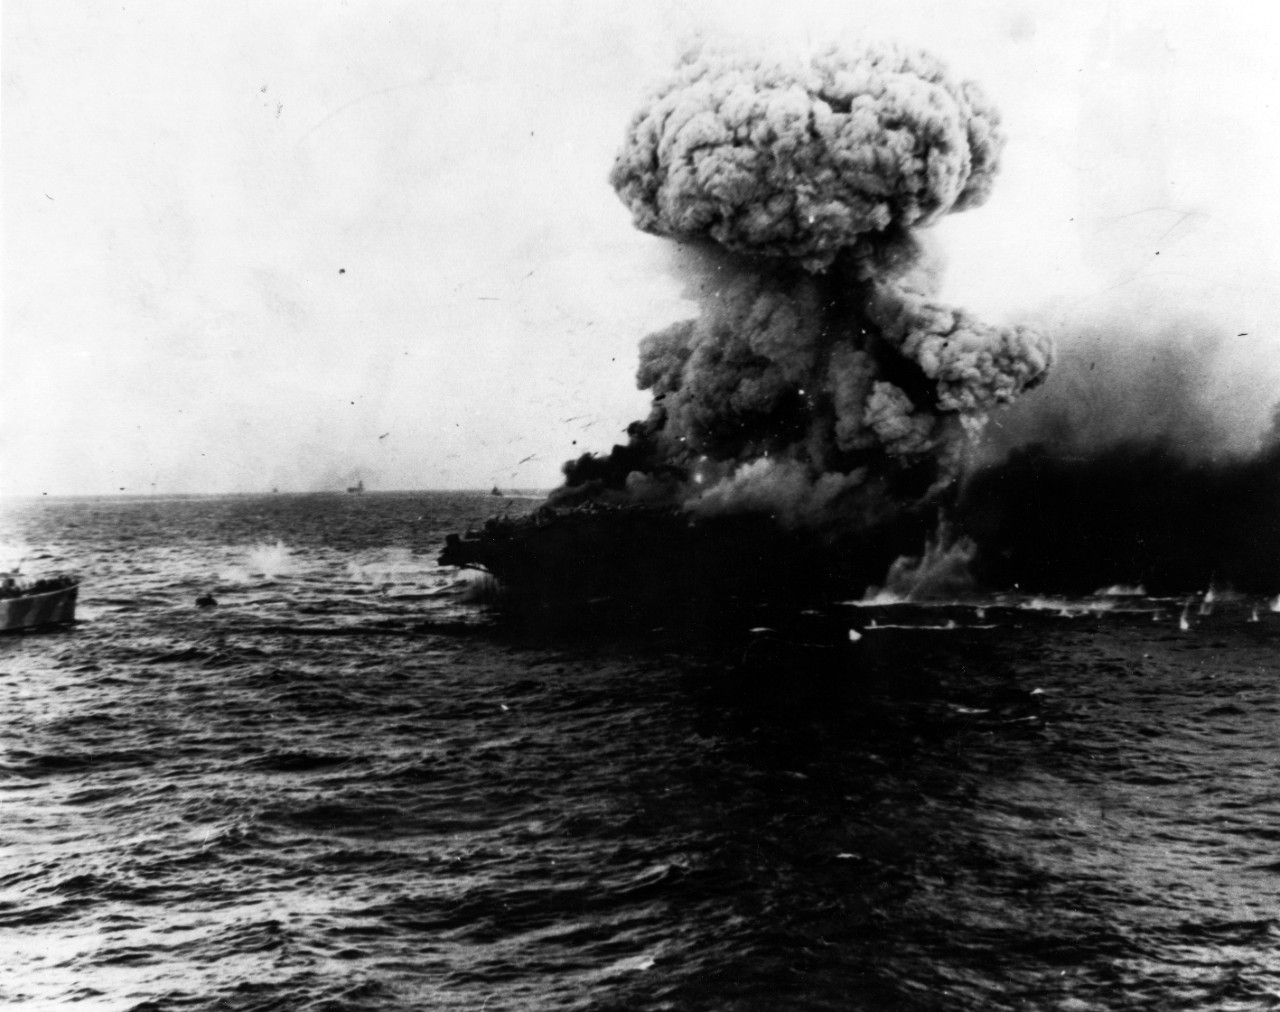 Photo #: 80-G-16651  Battle of the Coral Sea, May 1942